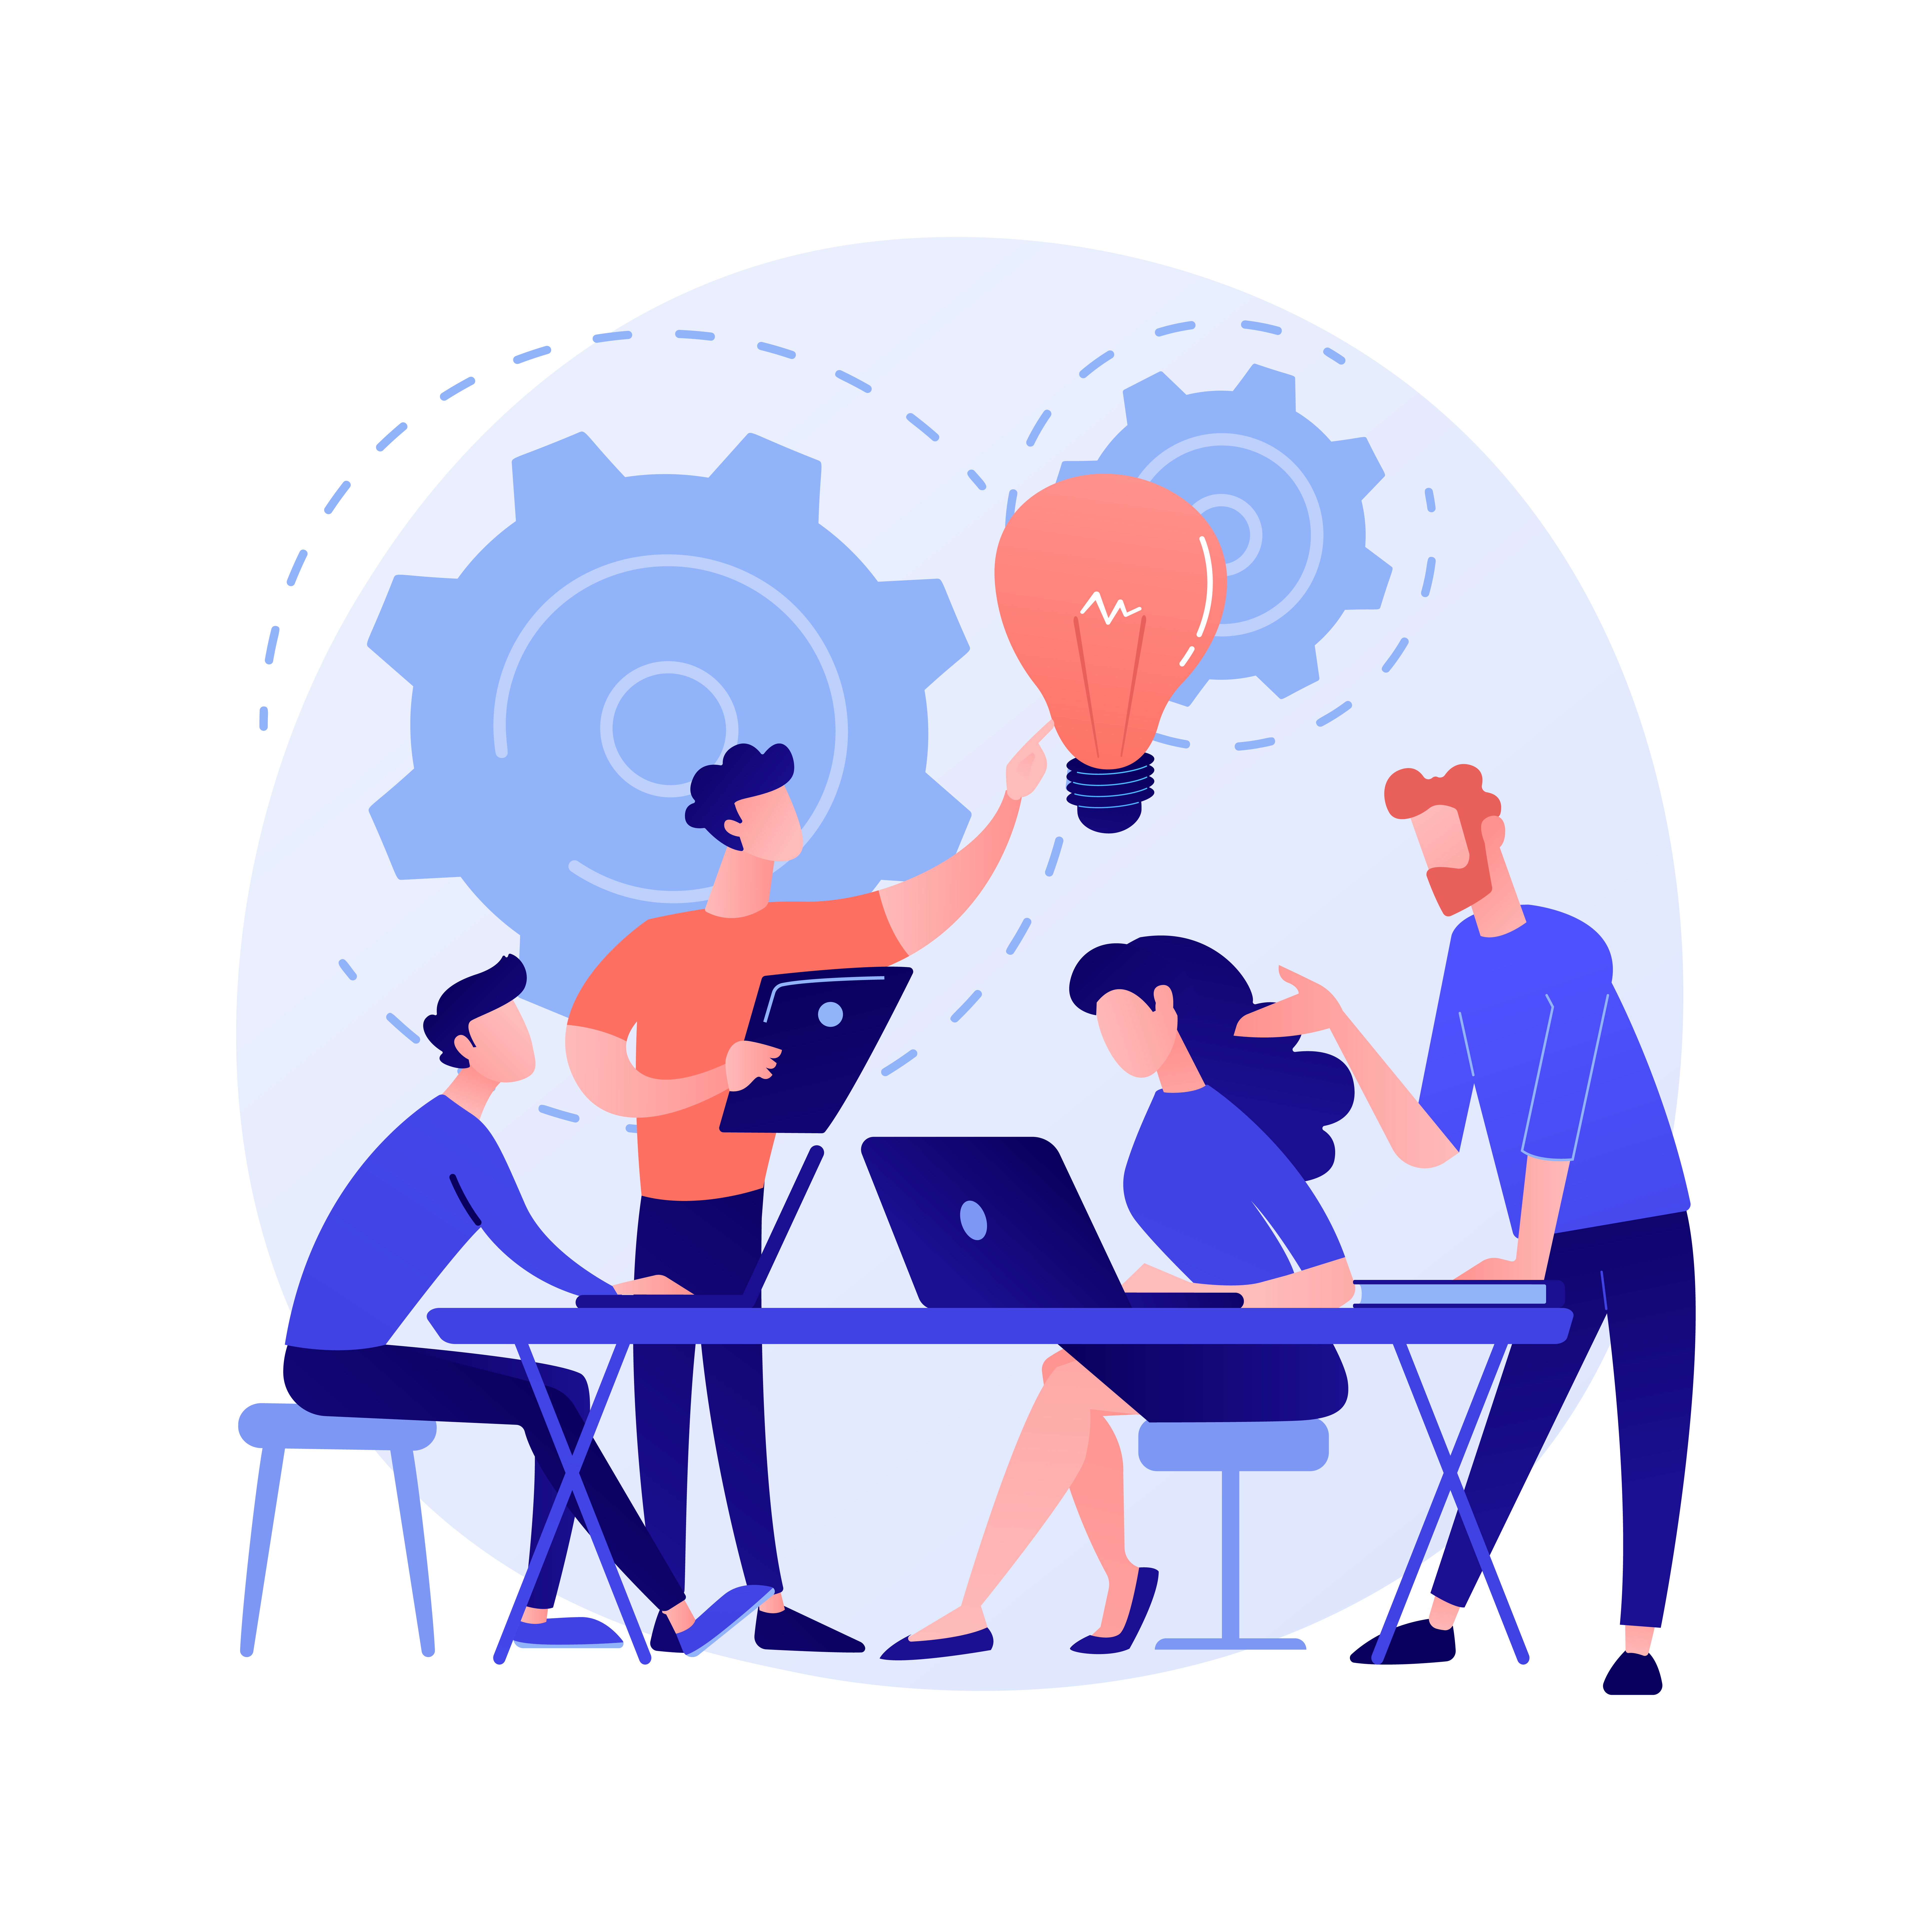 Corporate meeting. Employees cartoon characters discussing business strategy and planning further actions. Brainstorming, formal communication, seminar. Vector isolated concept metaphor illustration